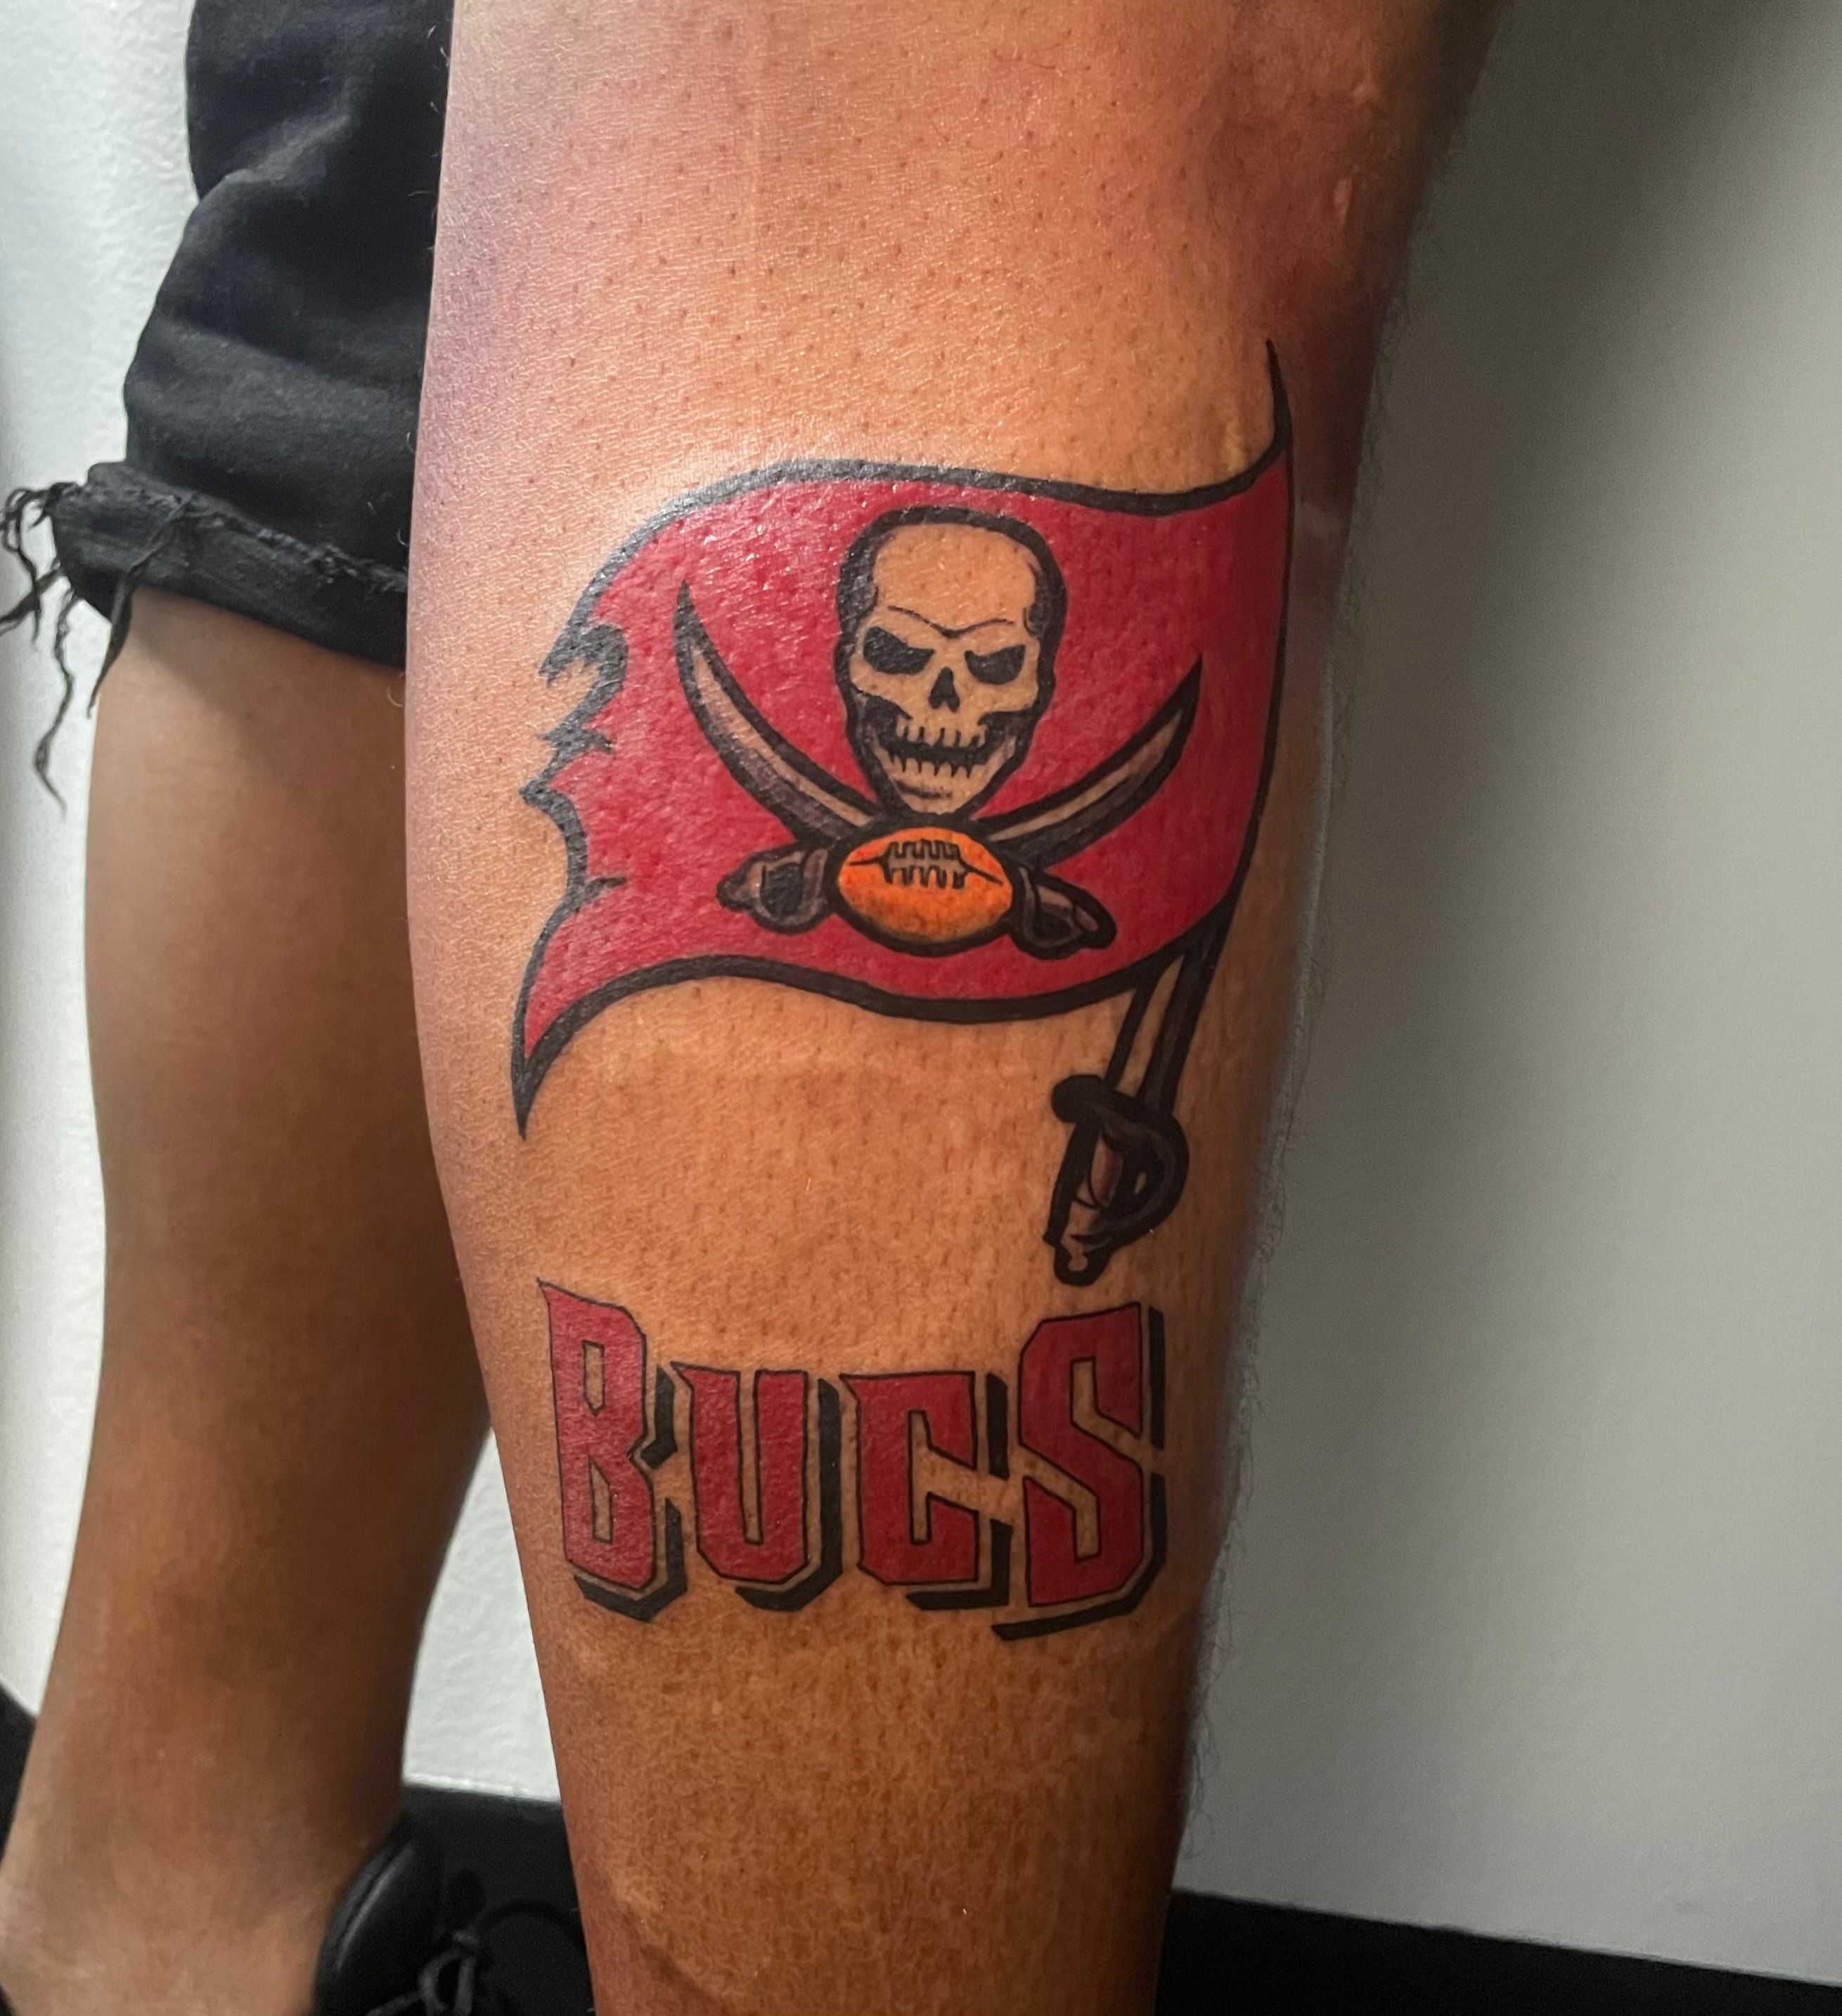 Tampa Bay Buccaneers on Twitter This one wins itsabucslife RT ESPNNFL  Attention NFL fans Tweet us your NFL fan tattoo pictures Use NFLtattoo  httptcokQfUgXjBdA  Twitter